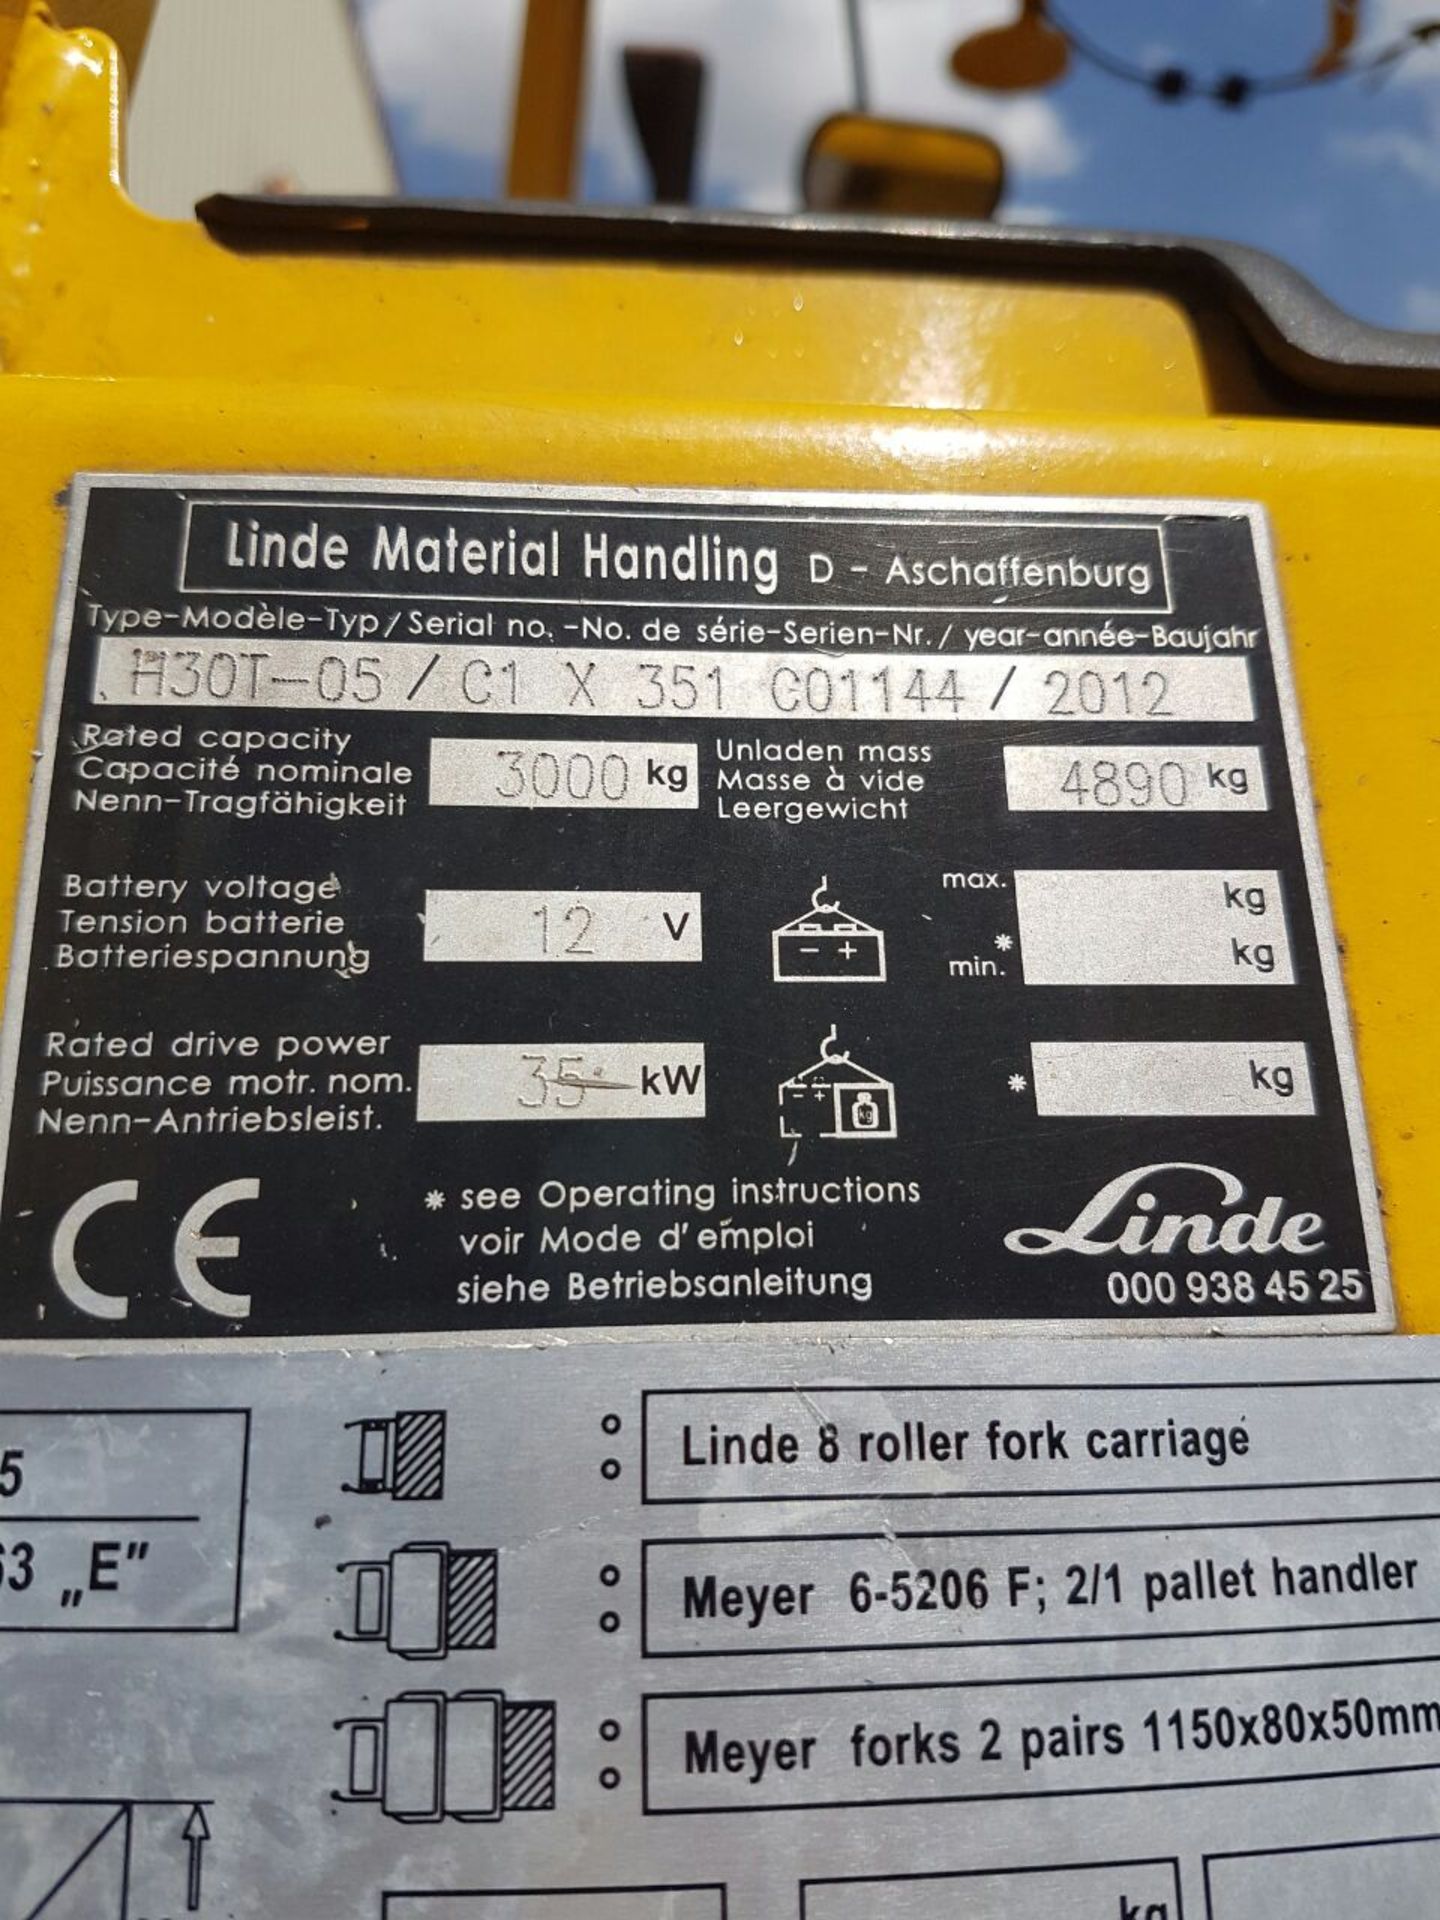 2012 LINDE H30T 3 TON GAS FORKLIFT (16,310 HOURS) C1X351C01144 - (JHB) - (STC) - Image 2 of 3